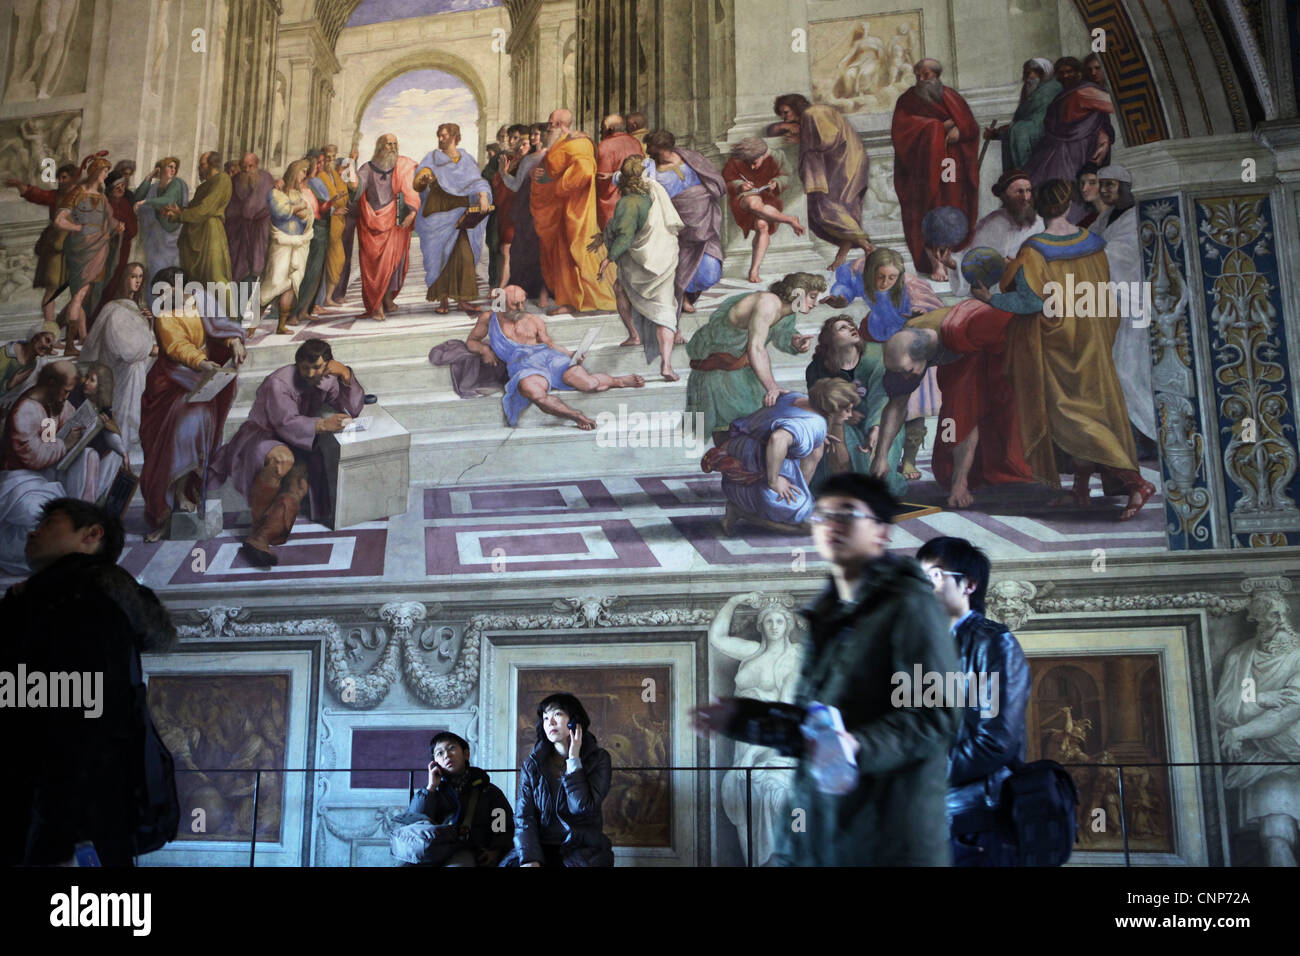 The School of Athens by Raphael in Raphael Rooms of the Vatican Palace, the Vatican Museums, Rome, Italy. Stock Photo